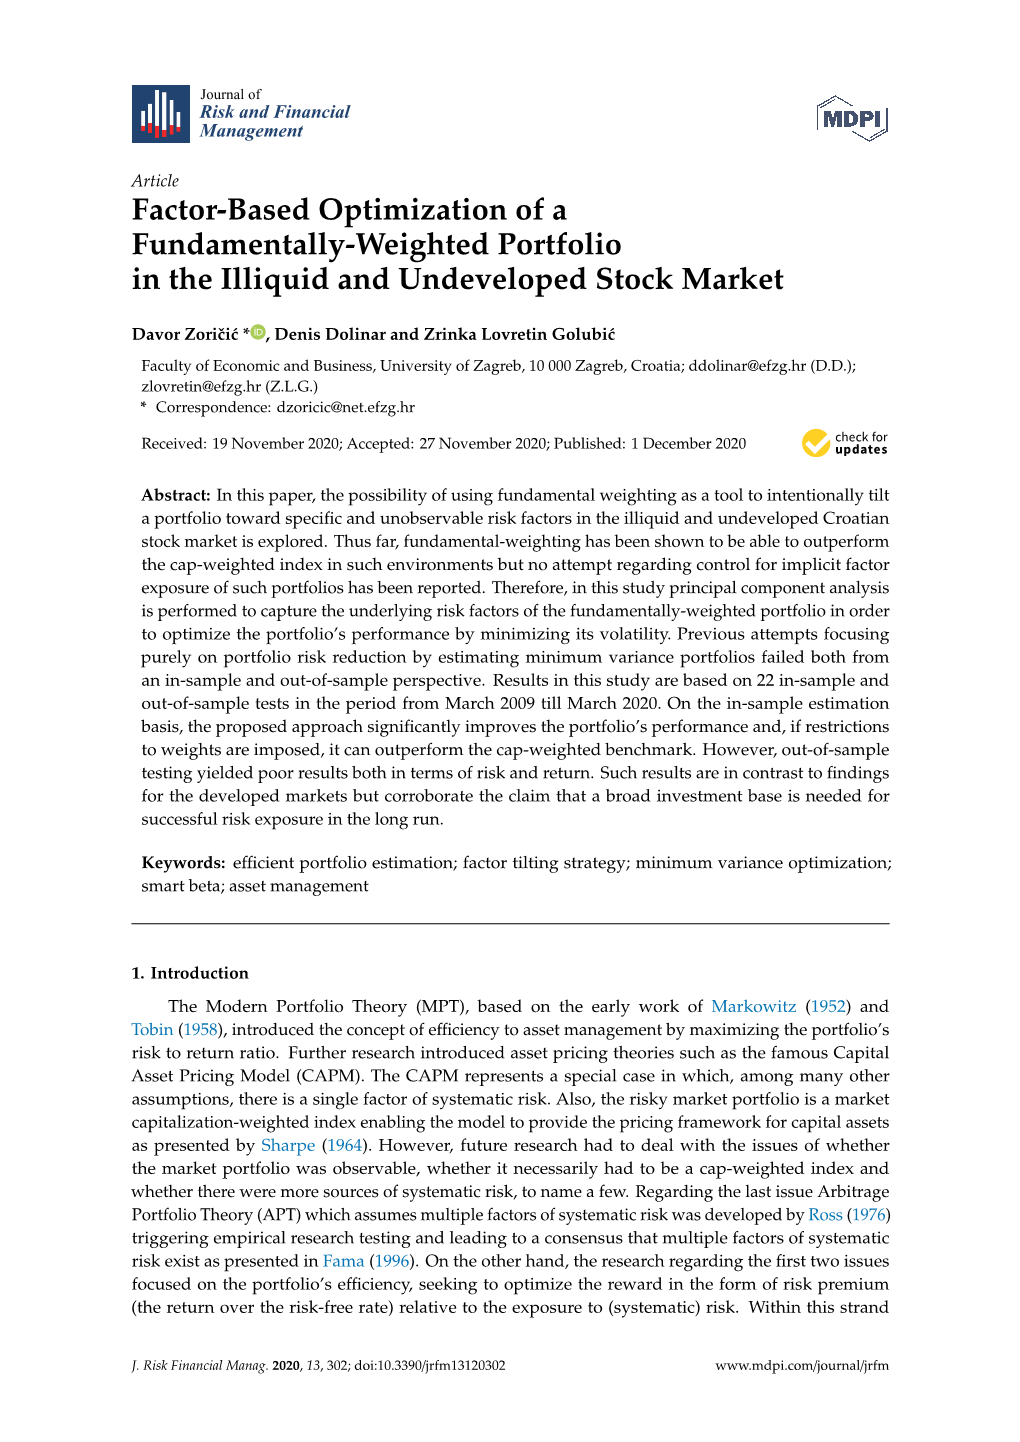 Factor-Based Optimization of a Fundamentally-Weighted Portfolio in the Illiquid and Undeveloped Stock Market